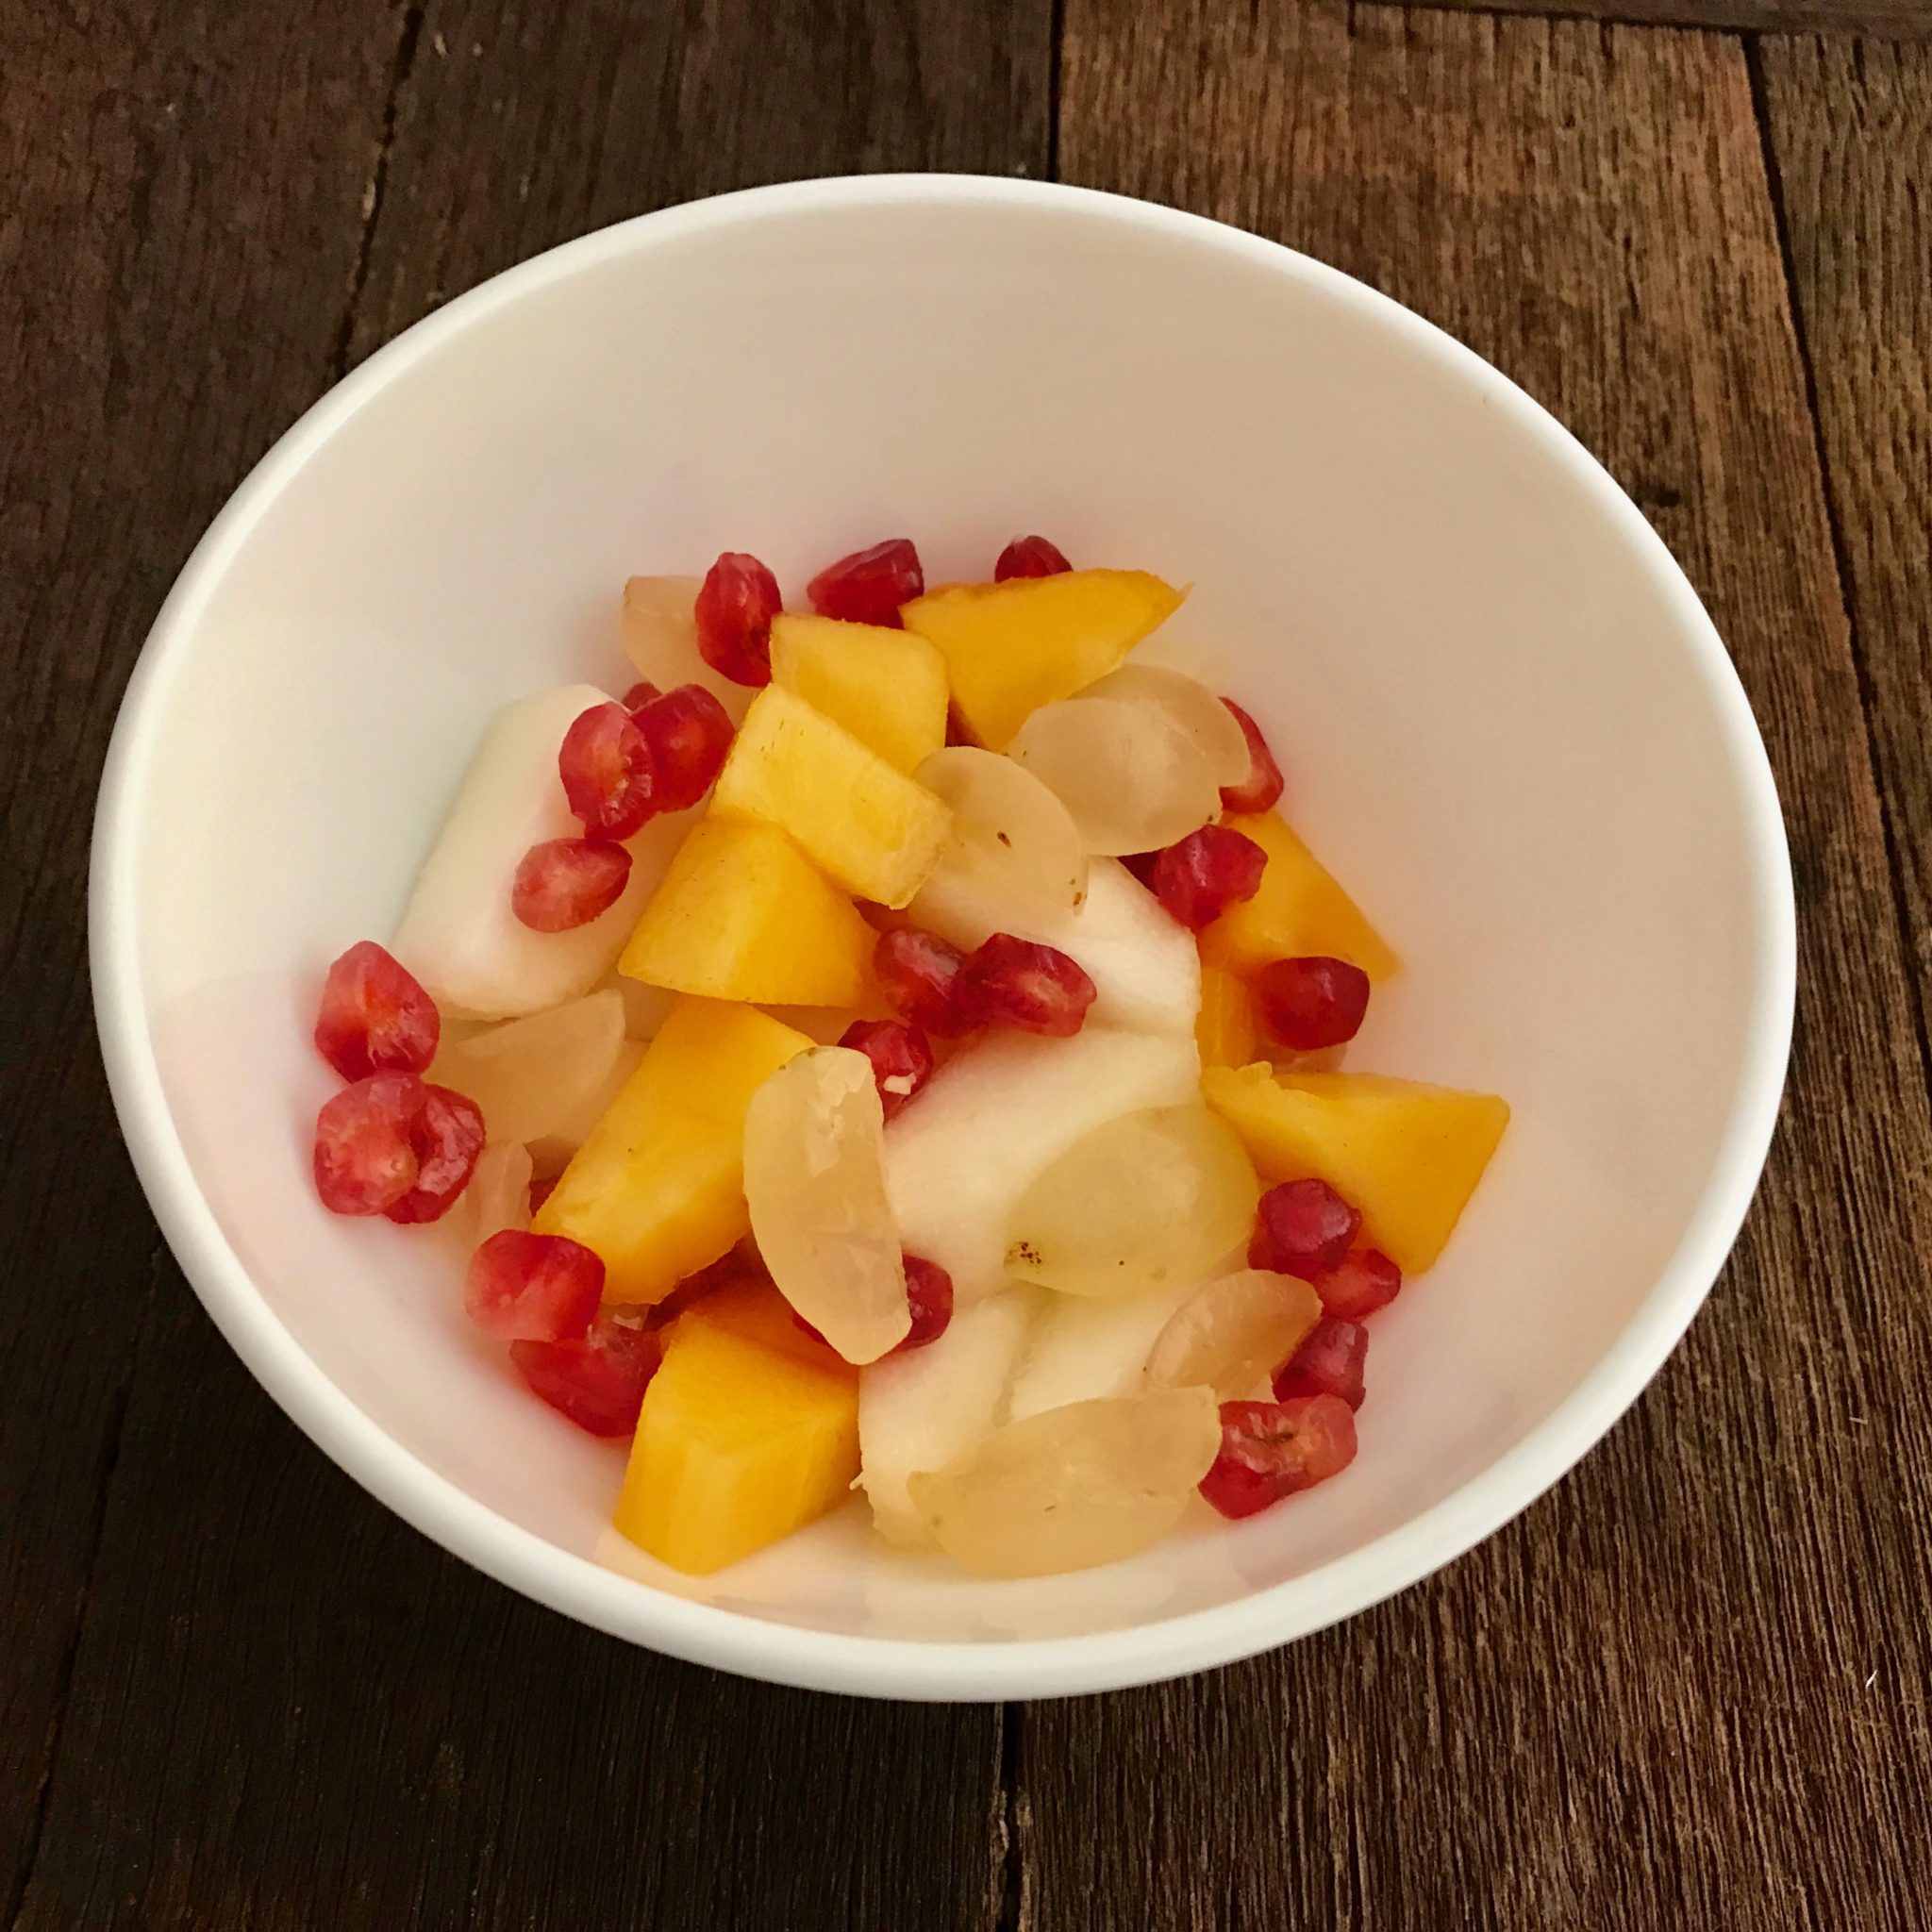 Start with a bowl of seasonal fruits